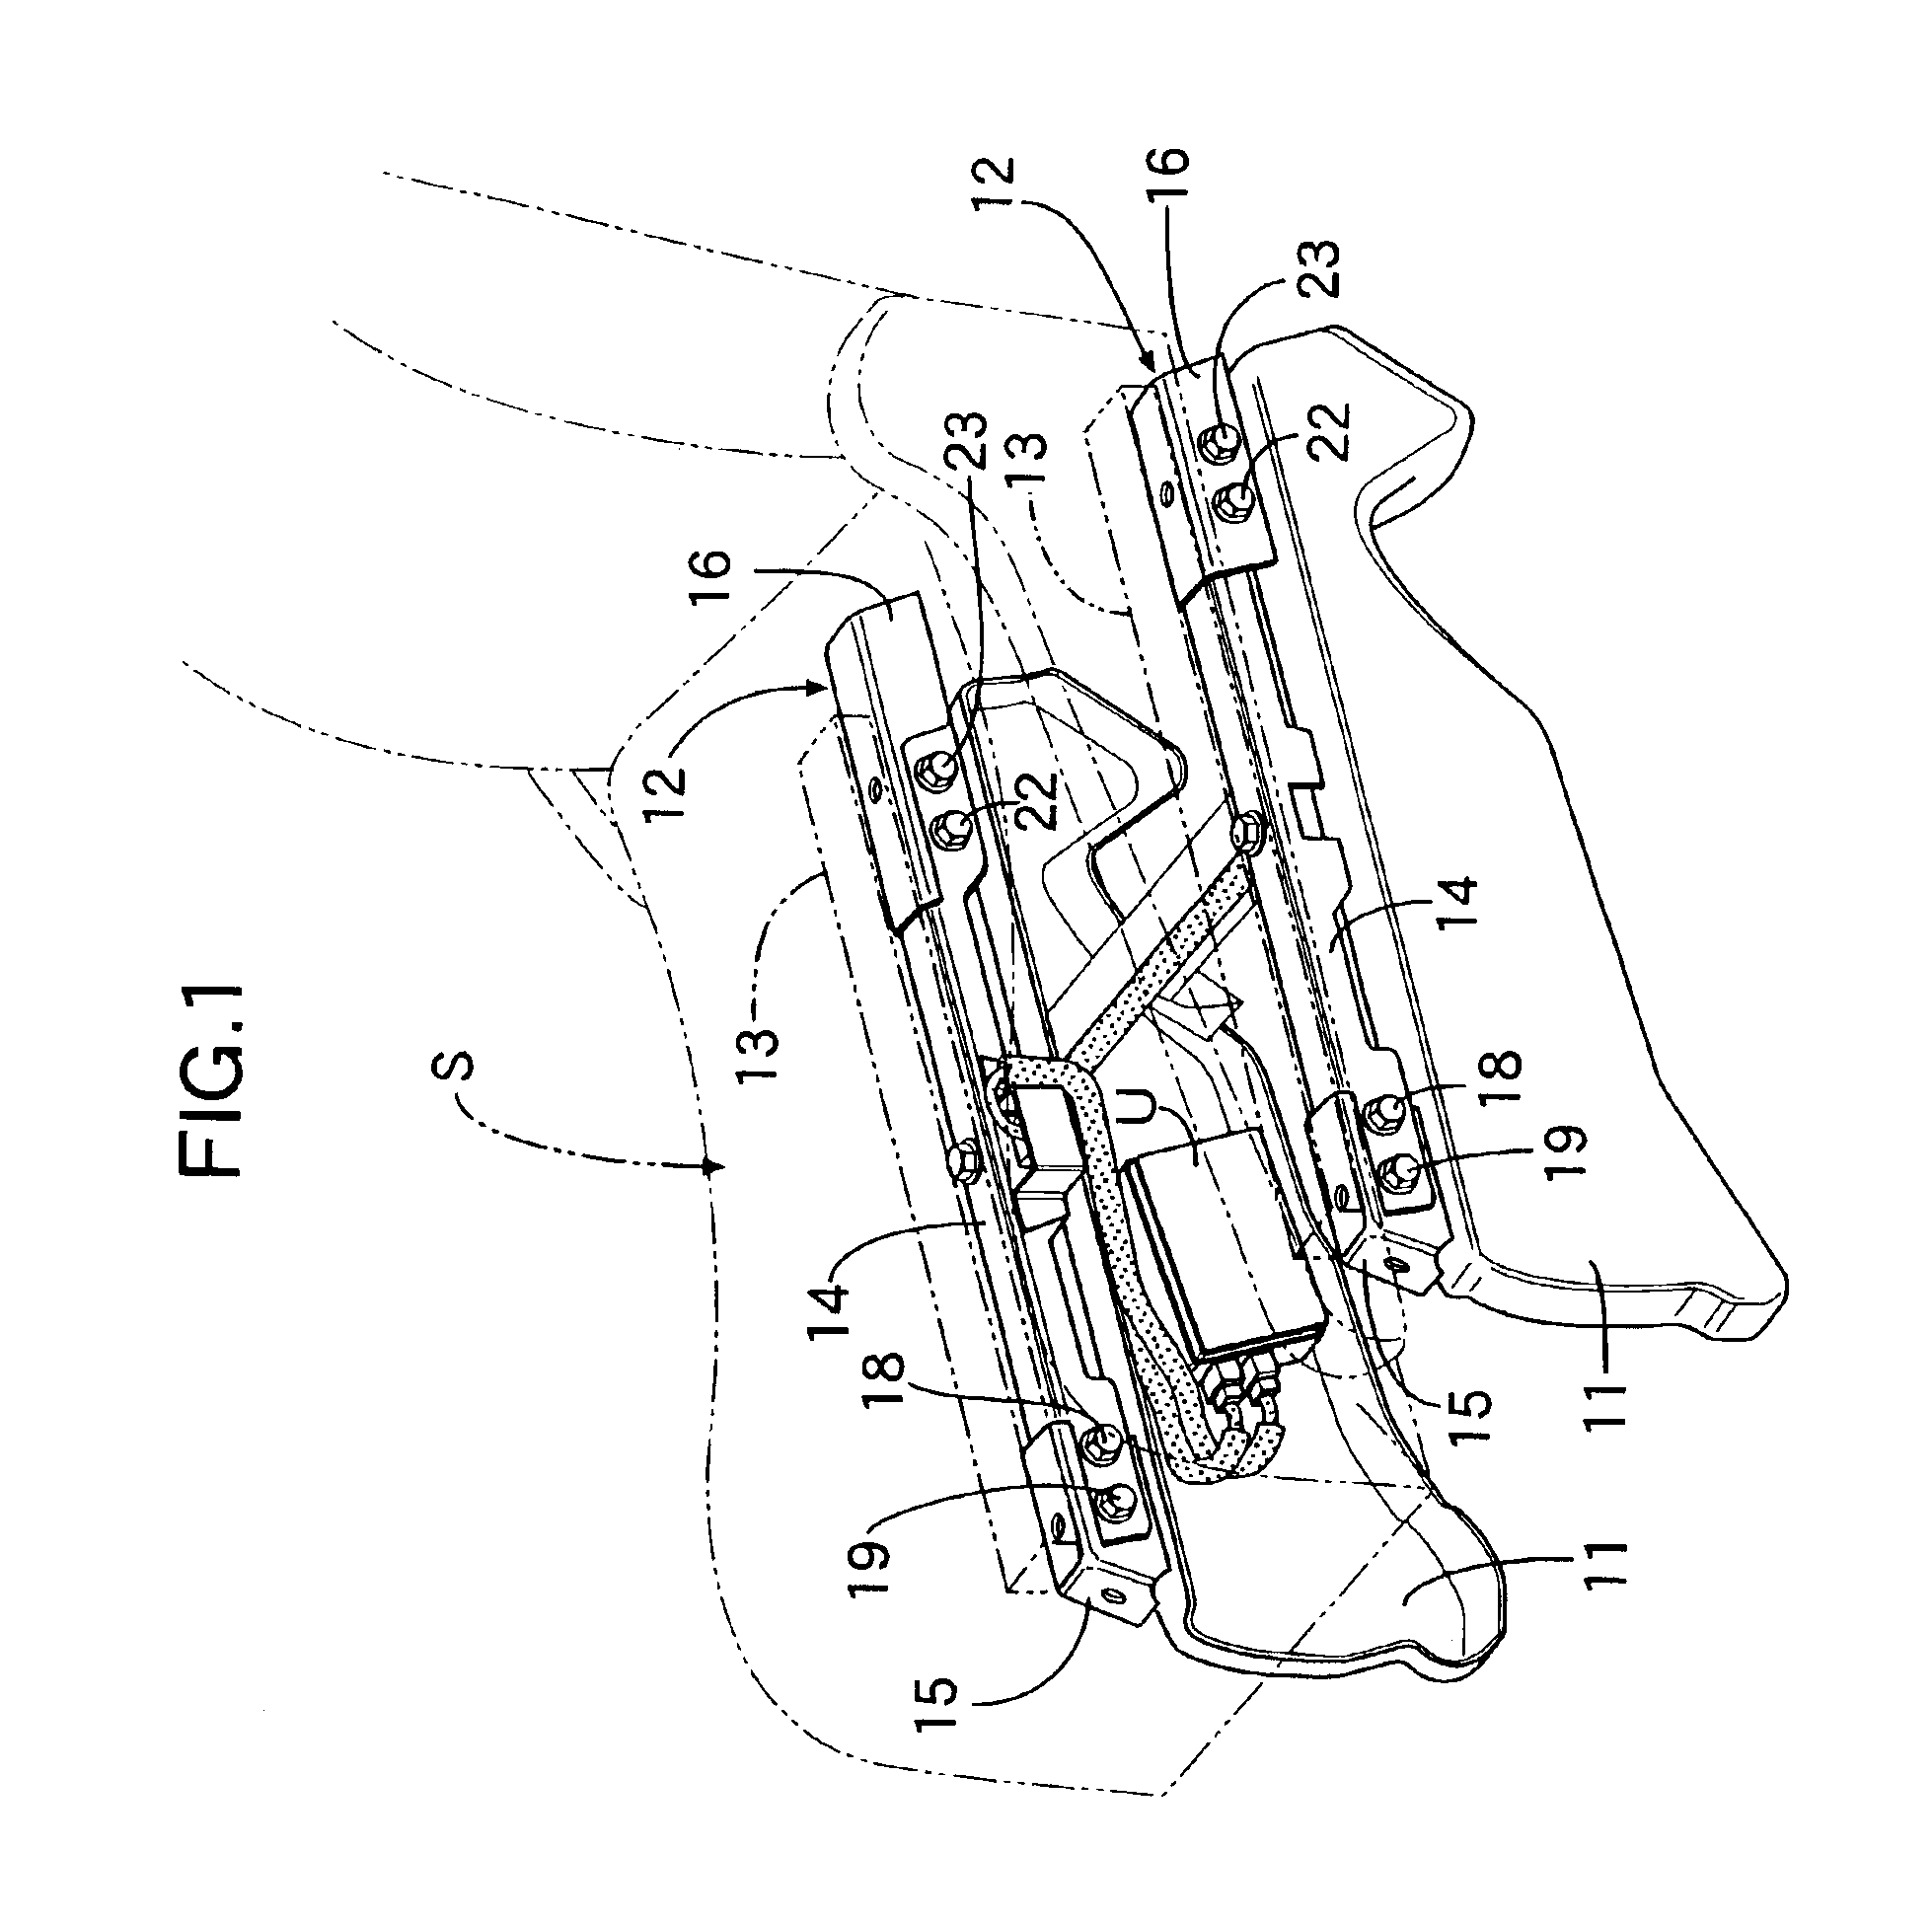 Process for controlling deployment of air bag